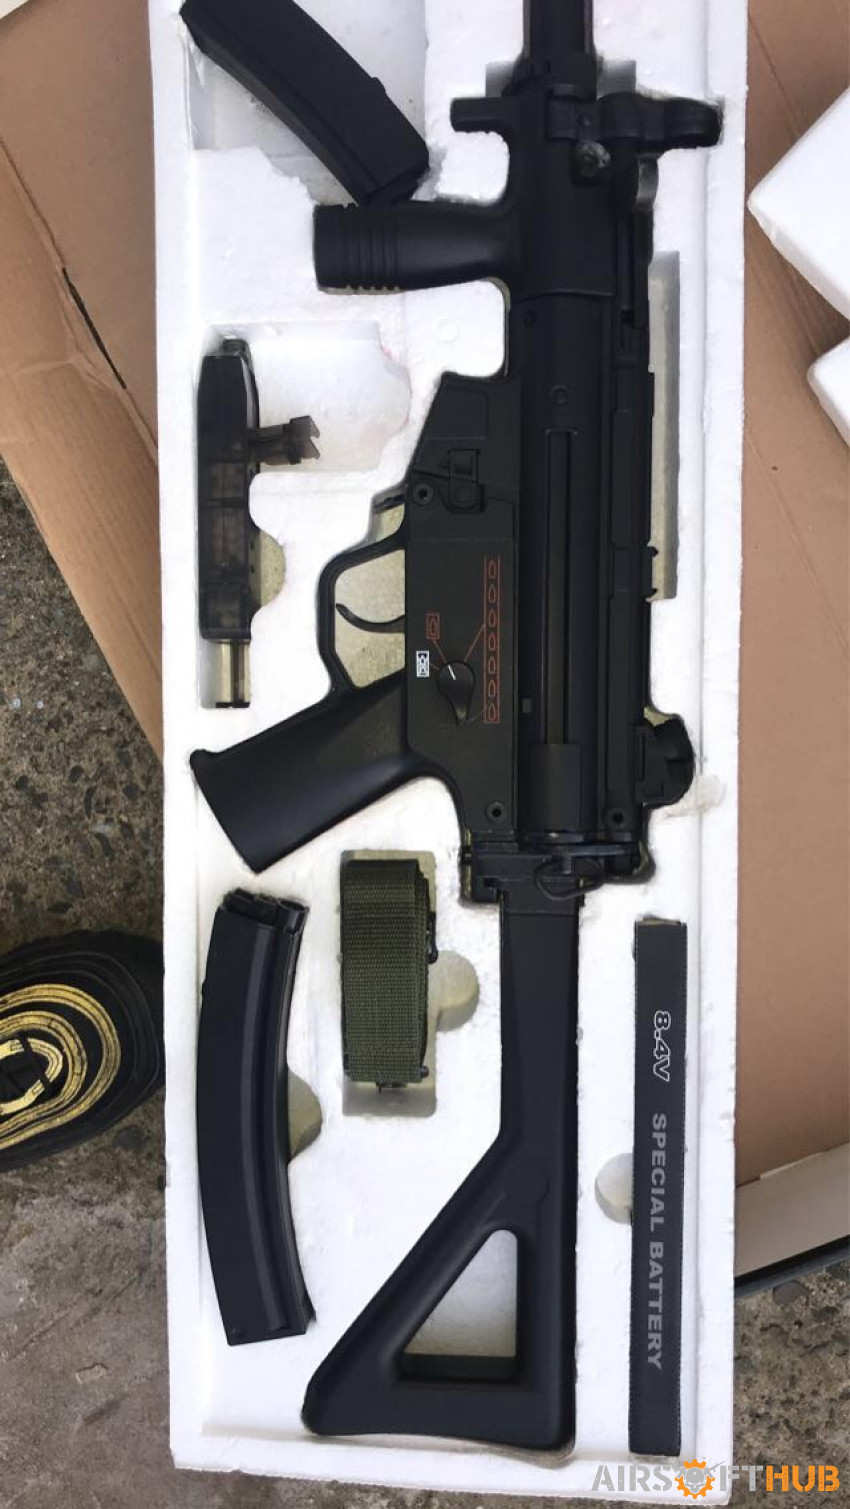 Sold******* - Used airsoft equipment